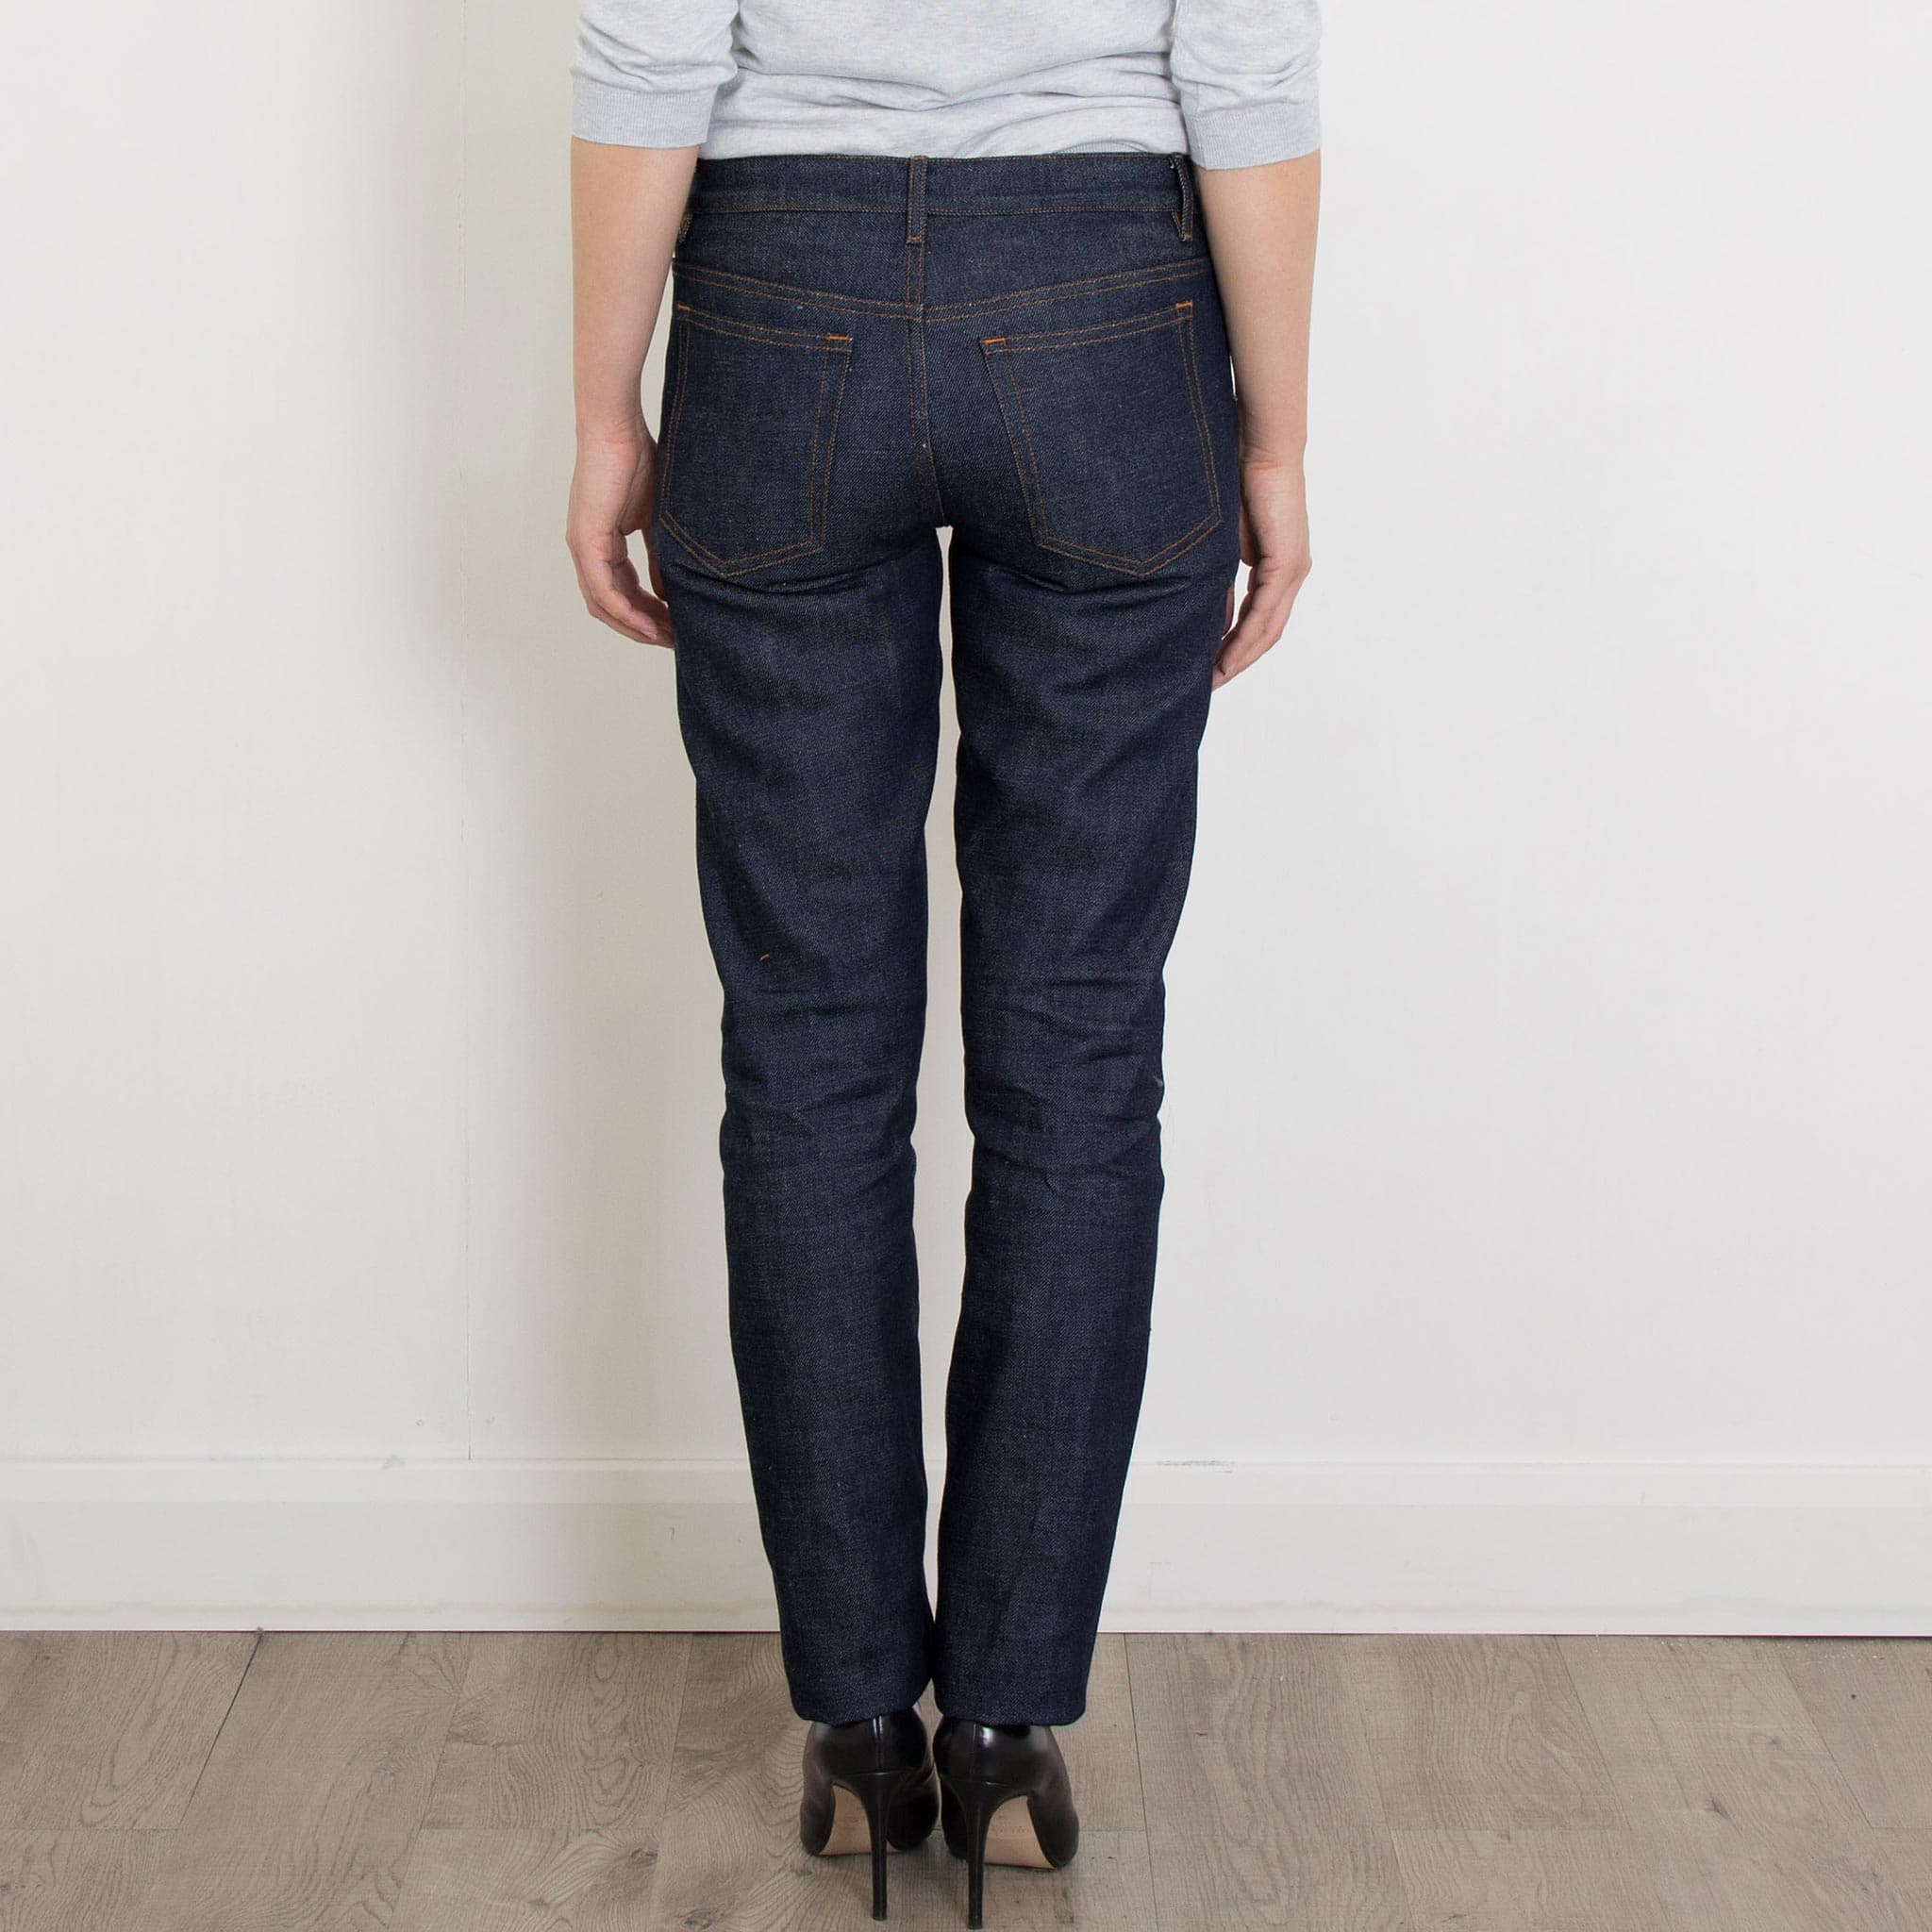 A.P.C. - PETIT STANDARD - LOW RISE STRAIGHT JEANS - CODBS M09002 